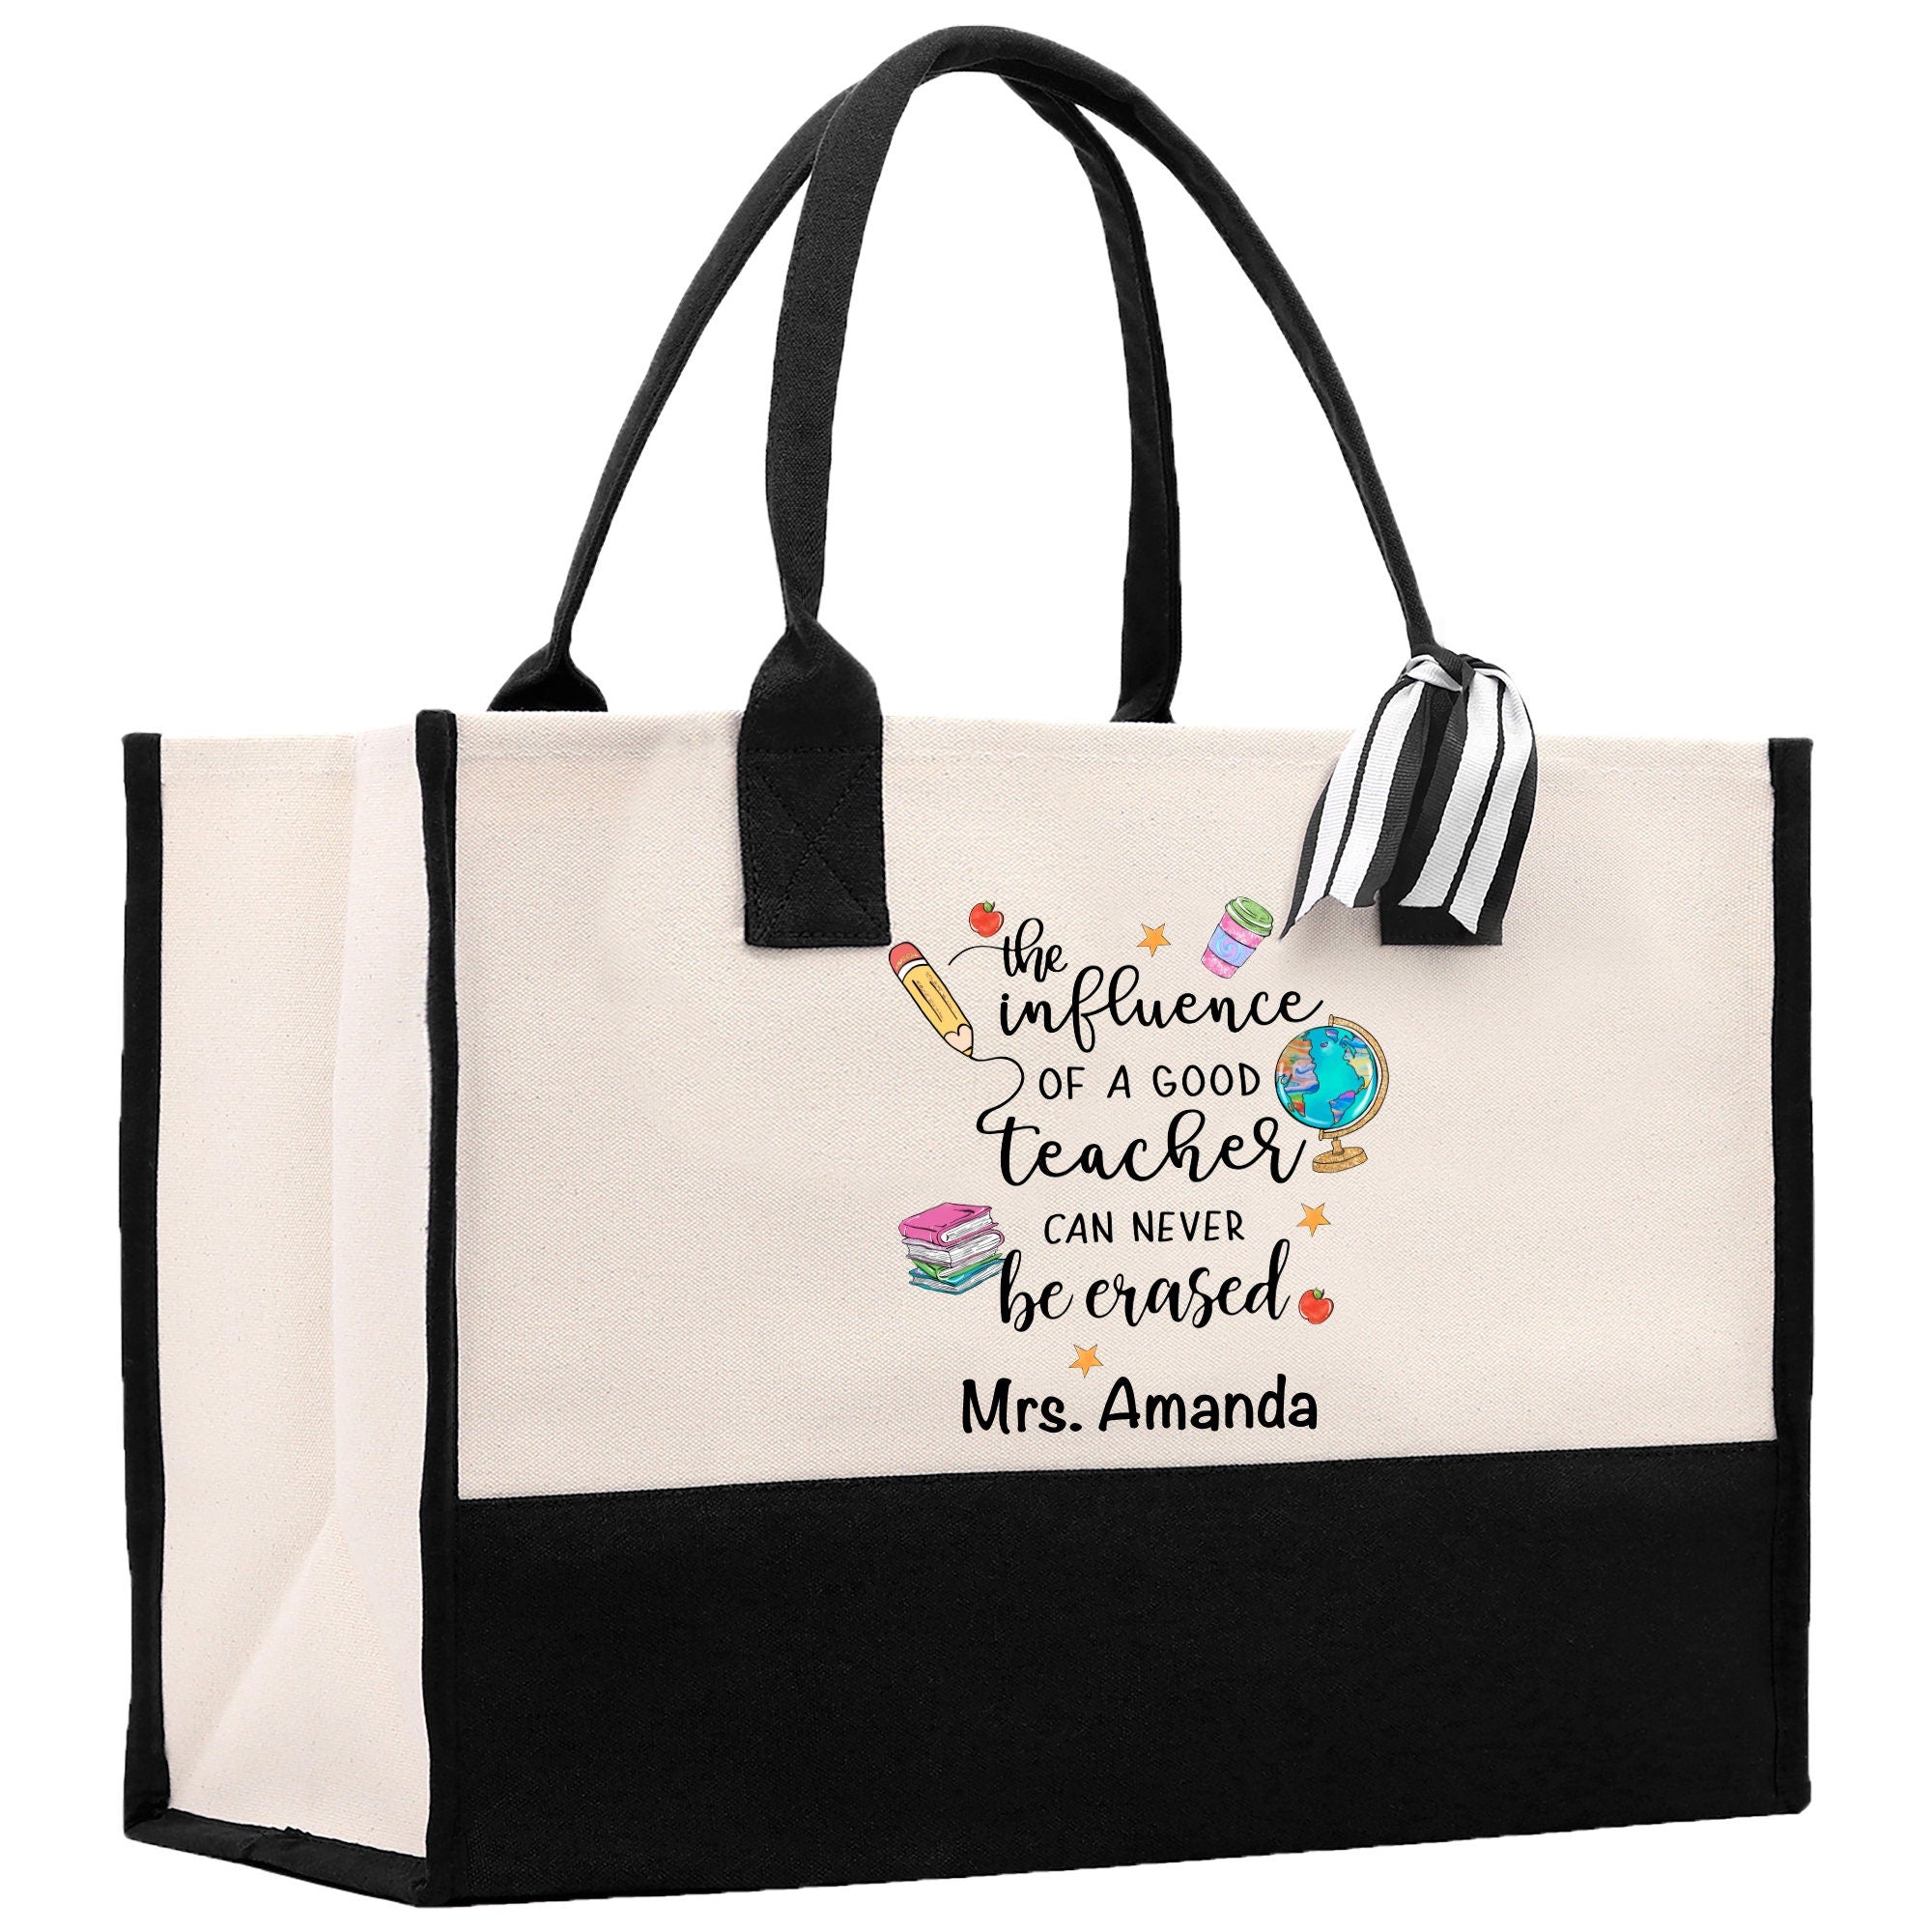 a black and white bag with a quote on it